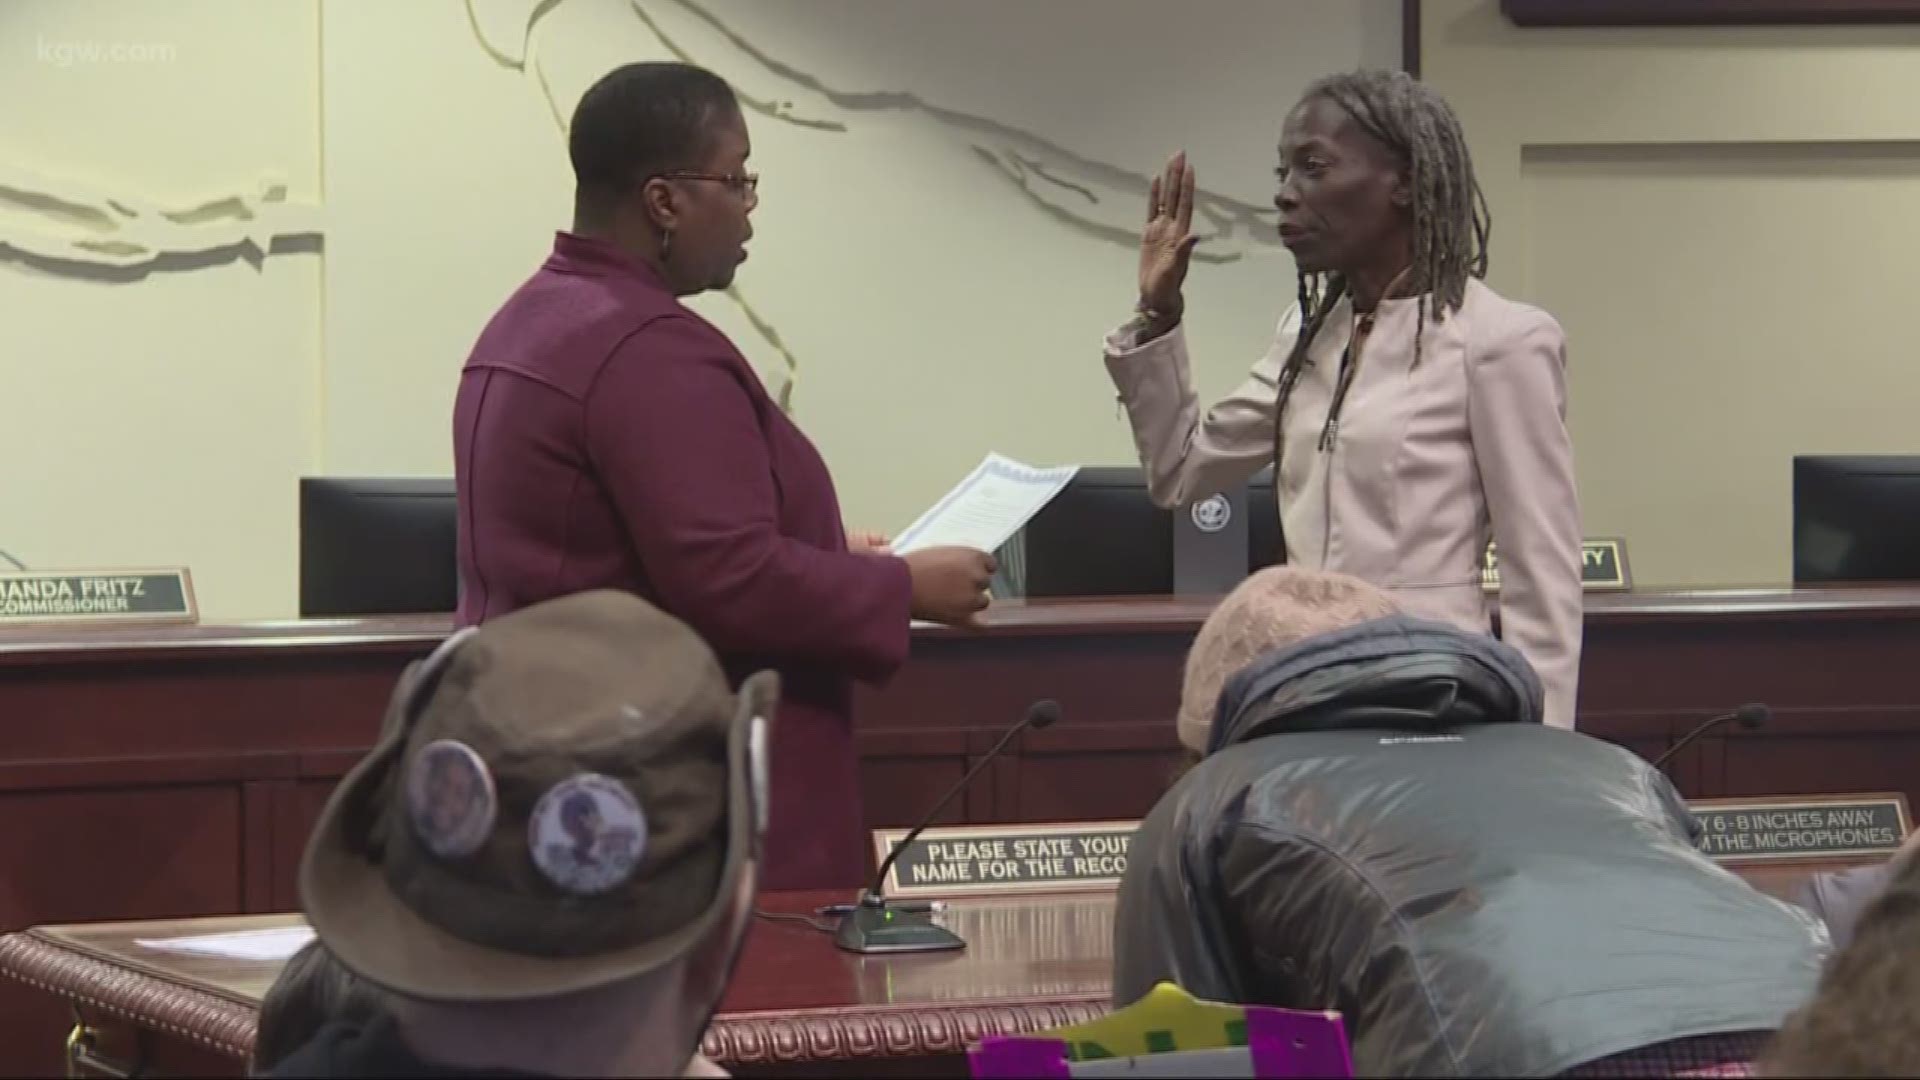 JoAnn Hardesty was sworn in as a Portland City Commissioner Jan. 2, marking the first African-American woman to serve on the Portland City Council. Another first, the council is majority female.